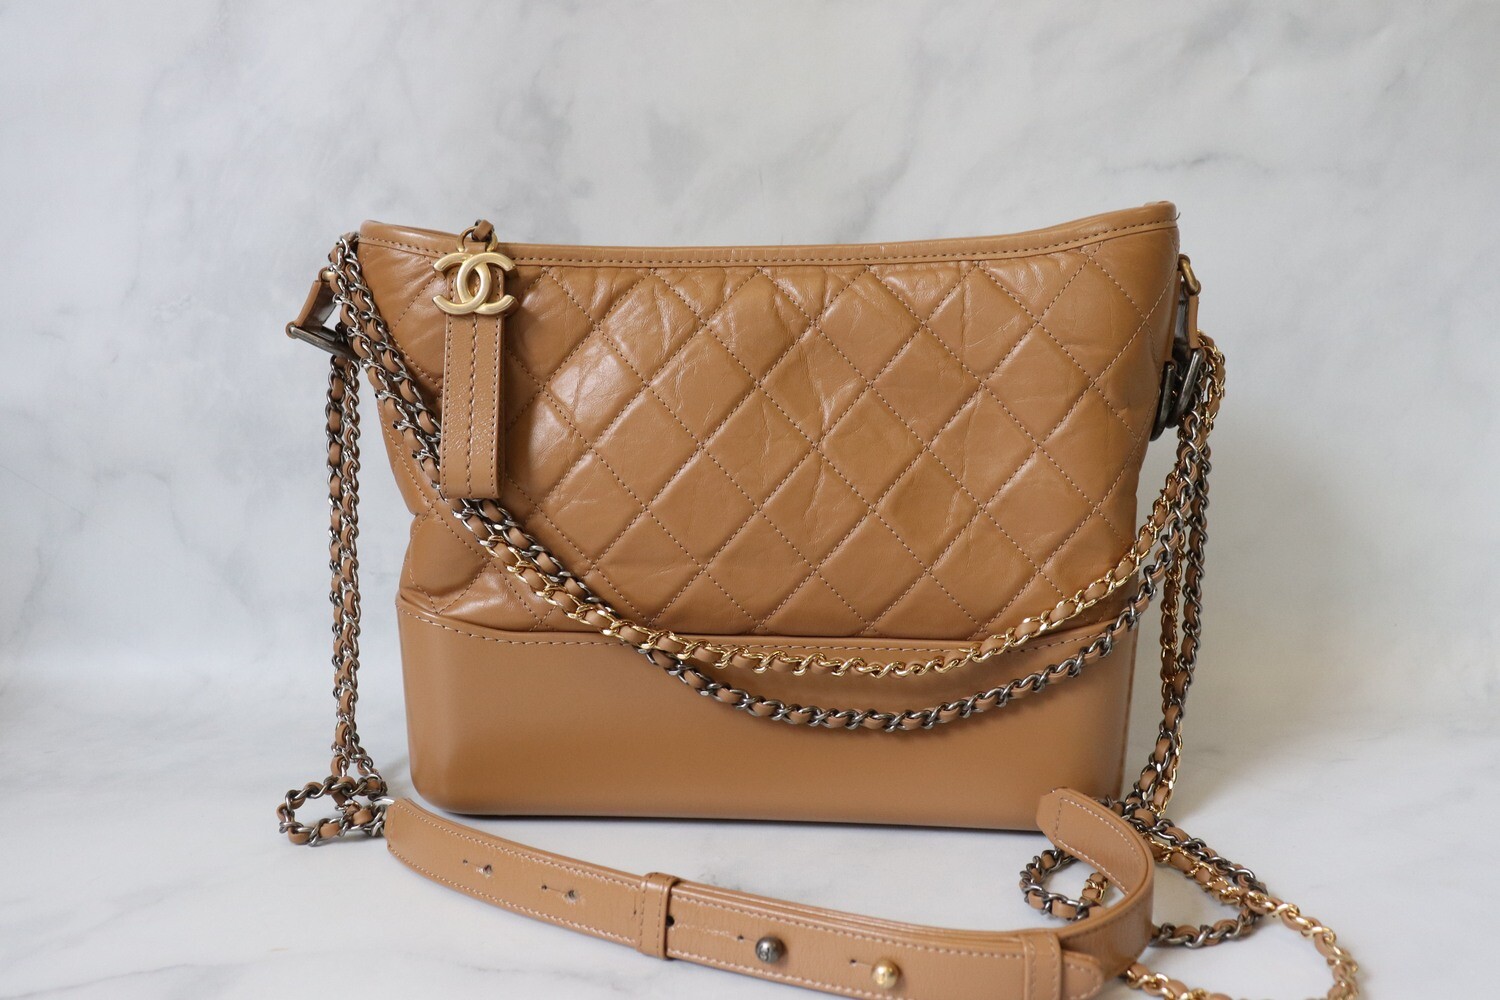 Chanel Gabrielle Large, Caramel Leather with Ruthenium Hardware, with  Dustbag and Card